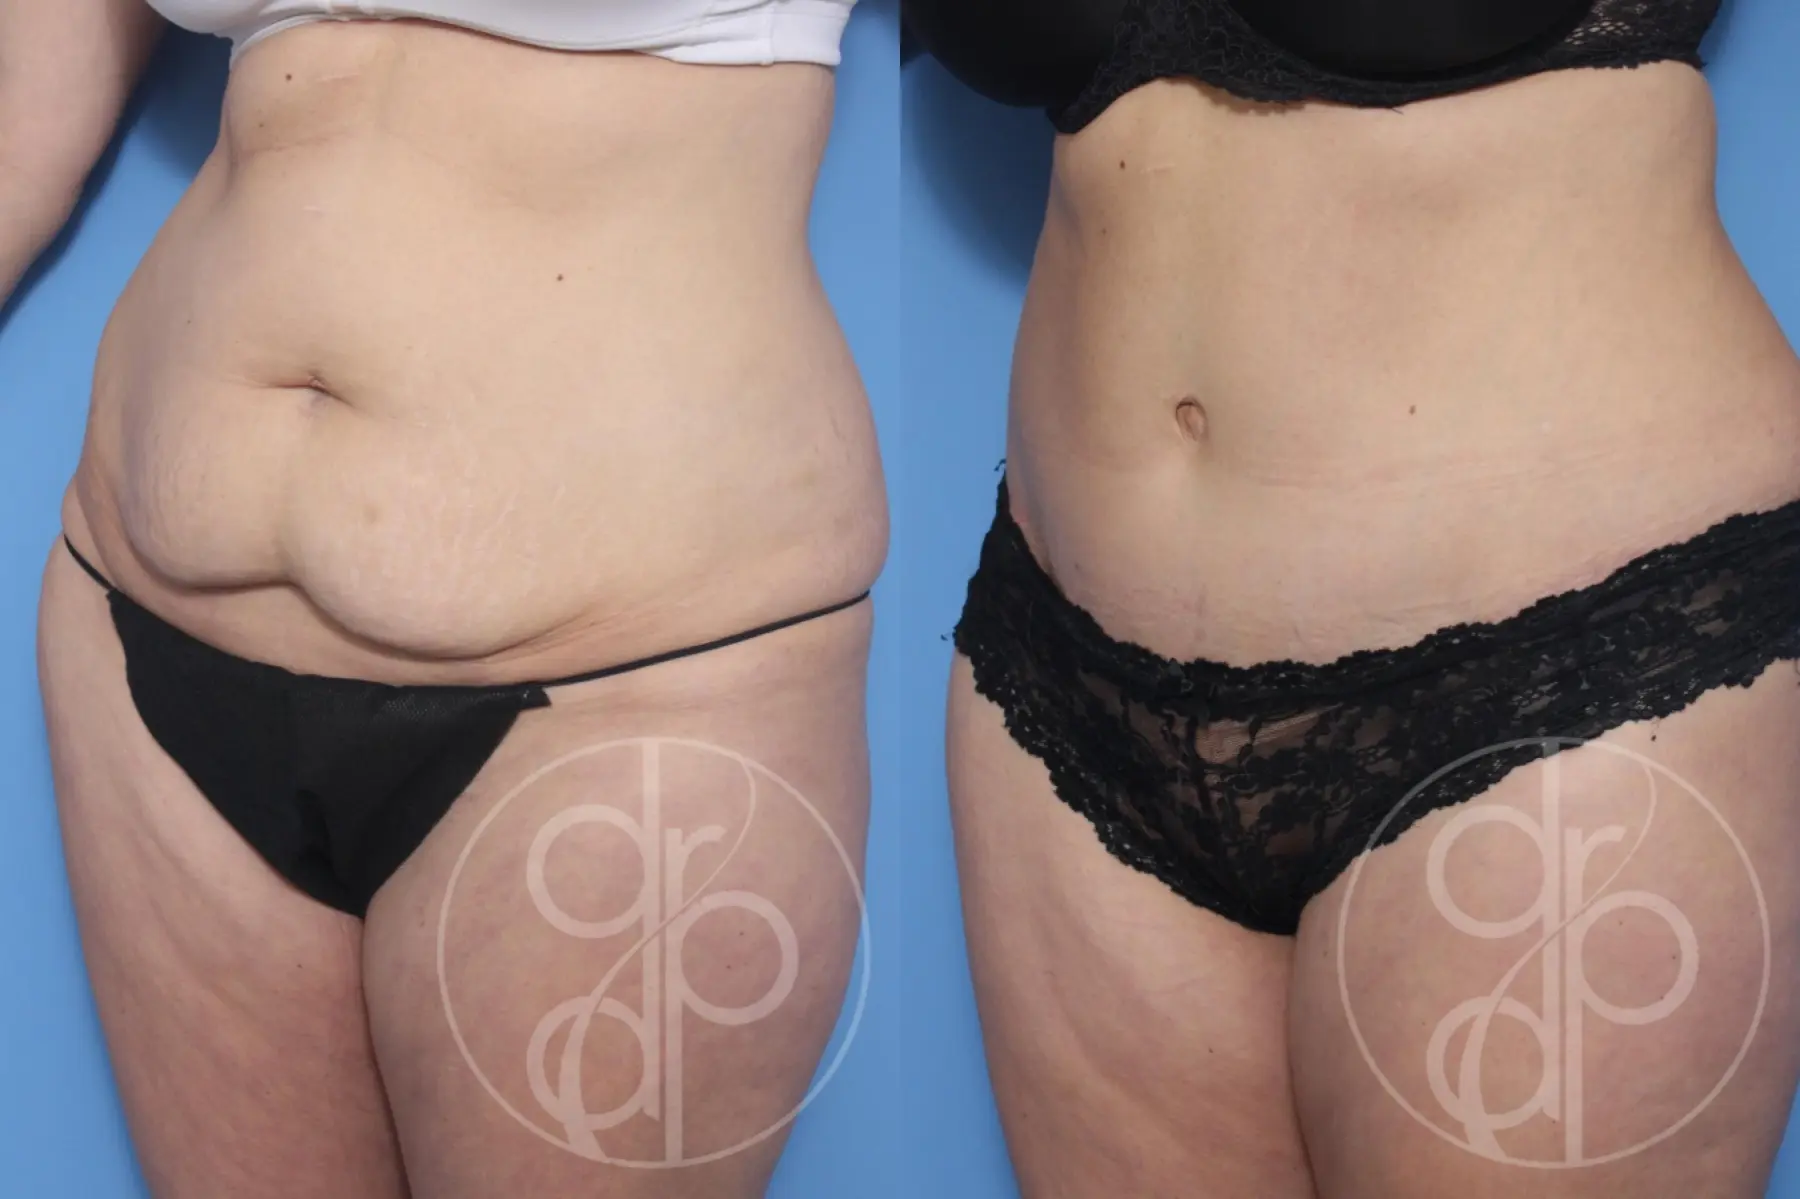 patient 12941 tummy tuck before and after result - Before and After 3